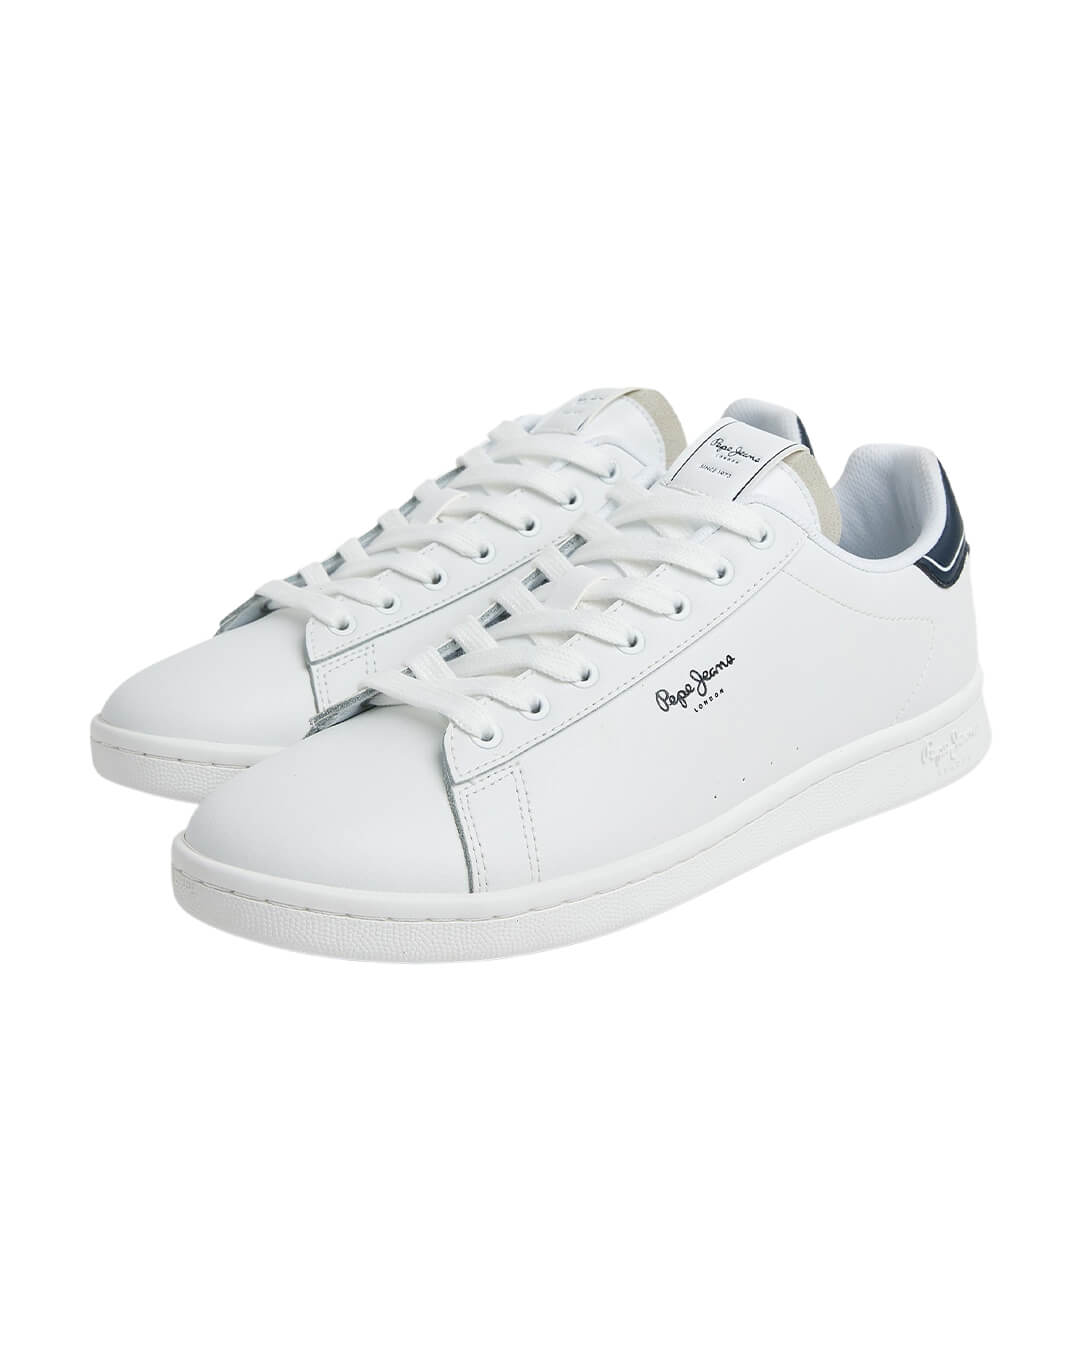 Pepe Jeans Shoes Pepe Jeans Player White Basic Sneakers